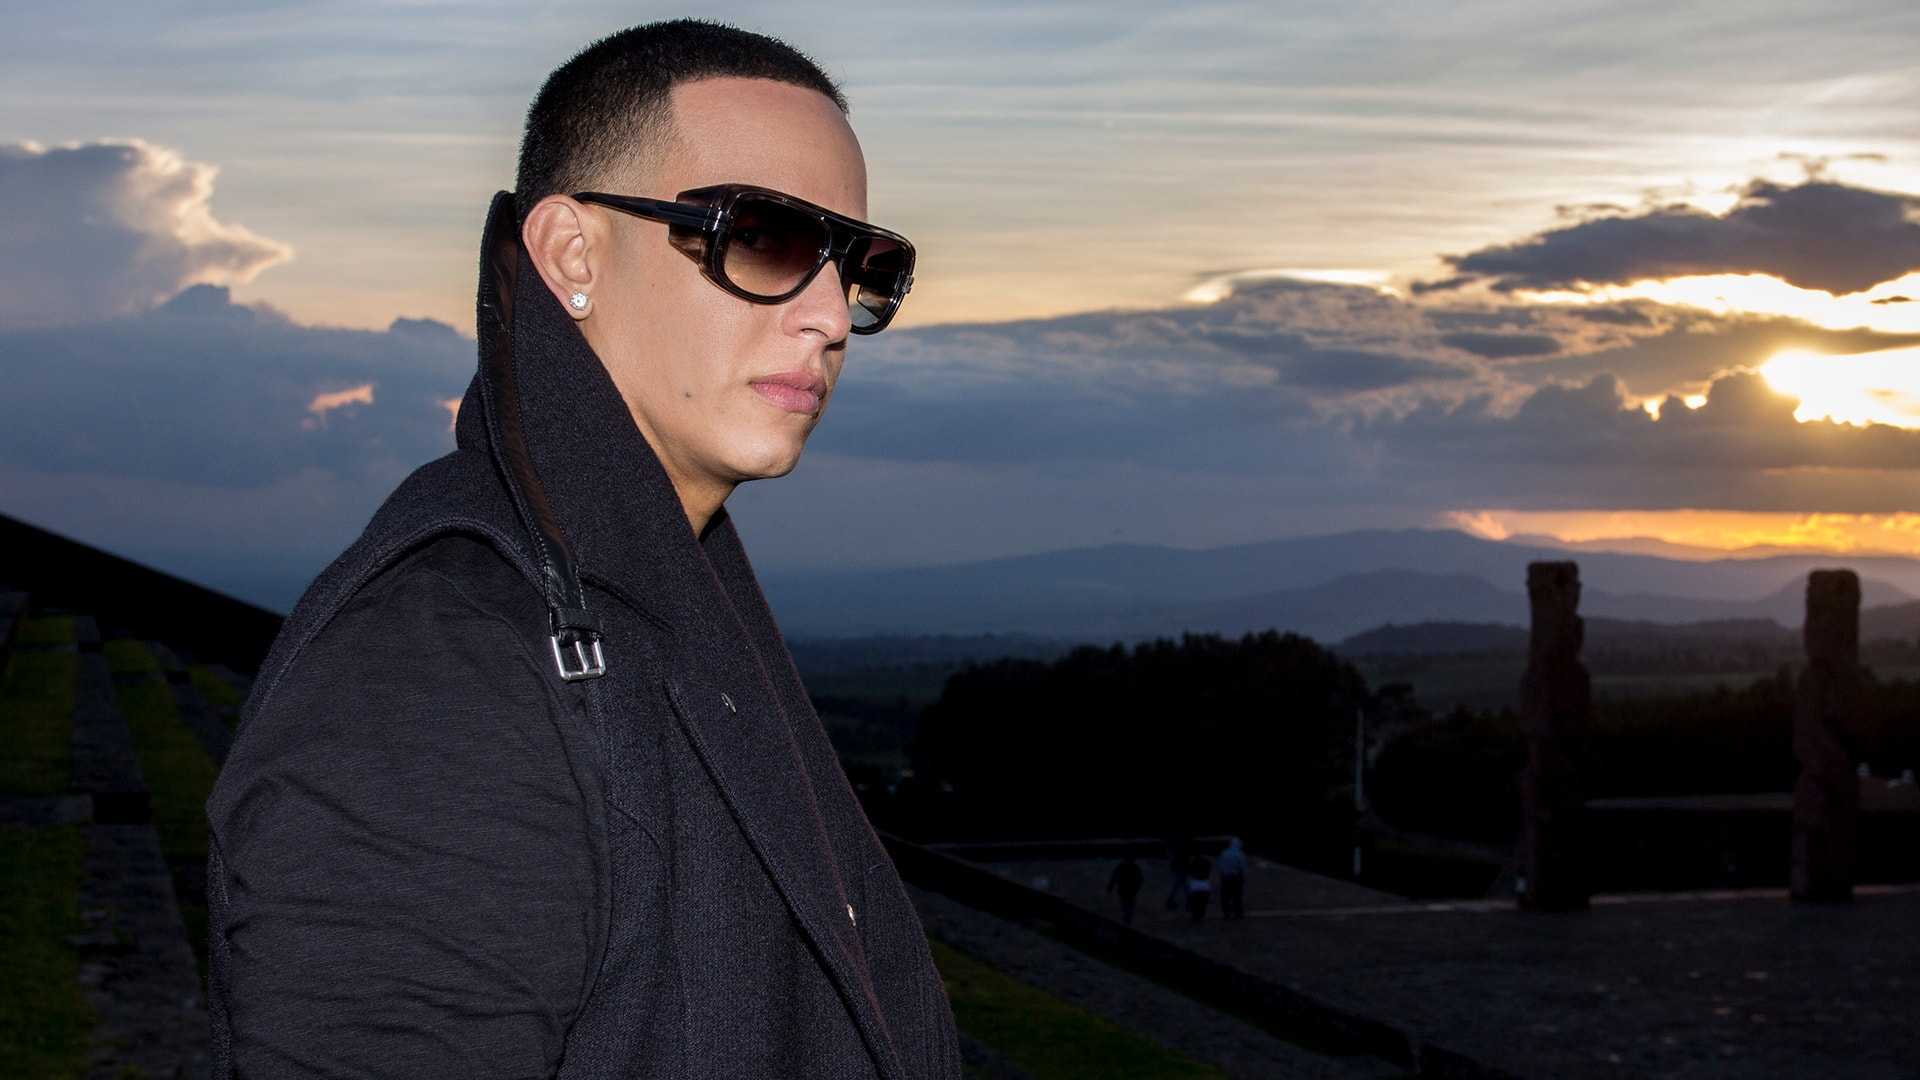 Hd Daddy Yankee Wallpapers Kolpaper Awesome Free Hd Wallpapers